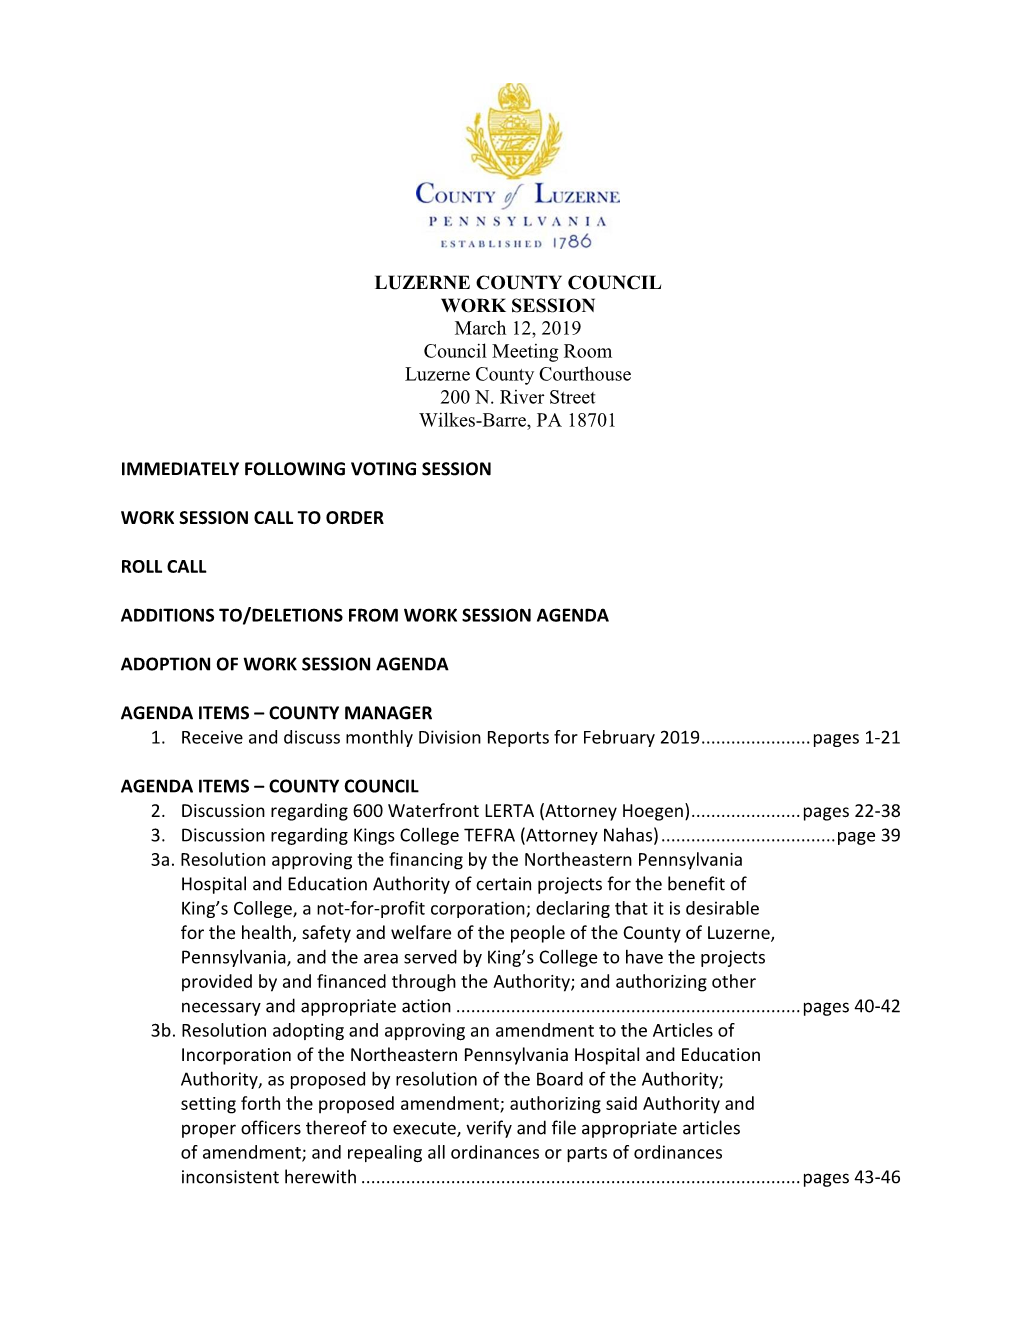 LUZERNE COUNTY COUNCIL WORK SESSION March 12, 2019 Council Meeting Room Luzerne County Courthouse 200 N